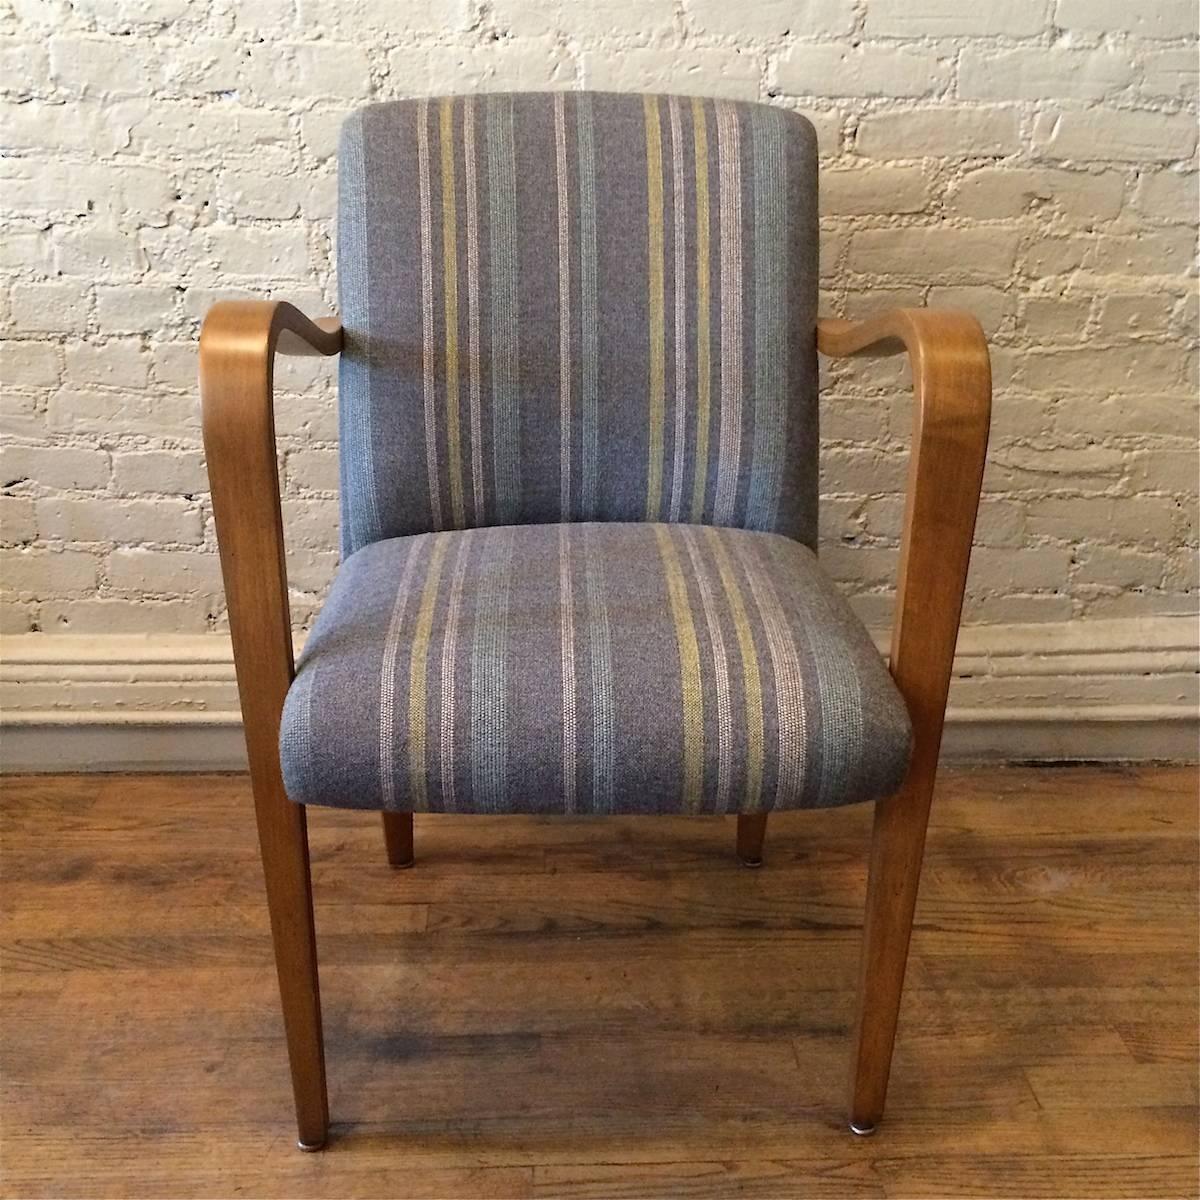 Vintage, Mid-Century Modern, maple, bentwood armchair by Thonet is newly upholstered in a stripped wool blend.